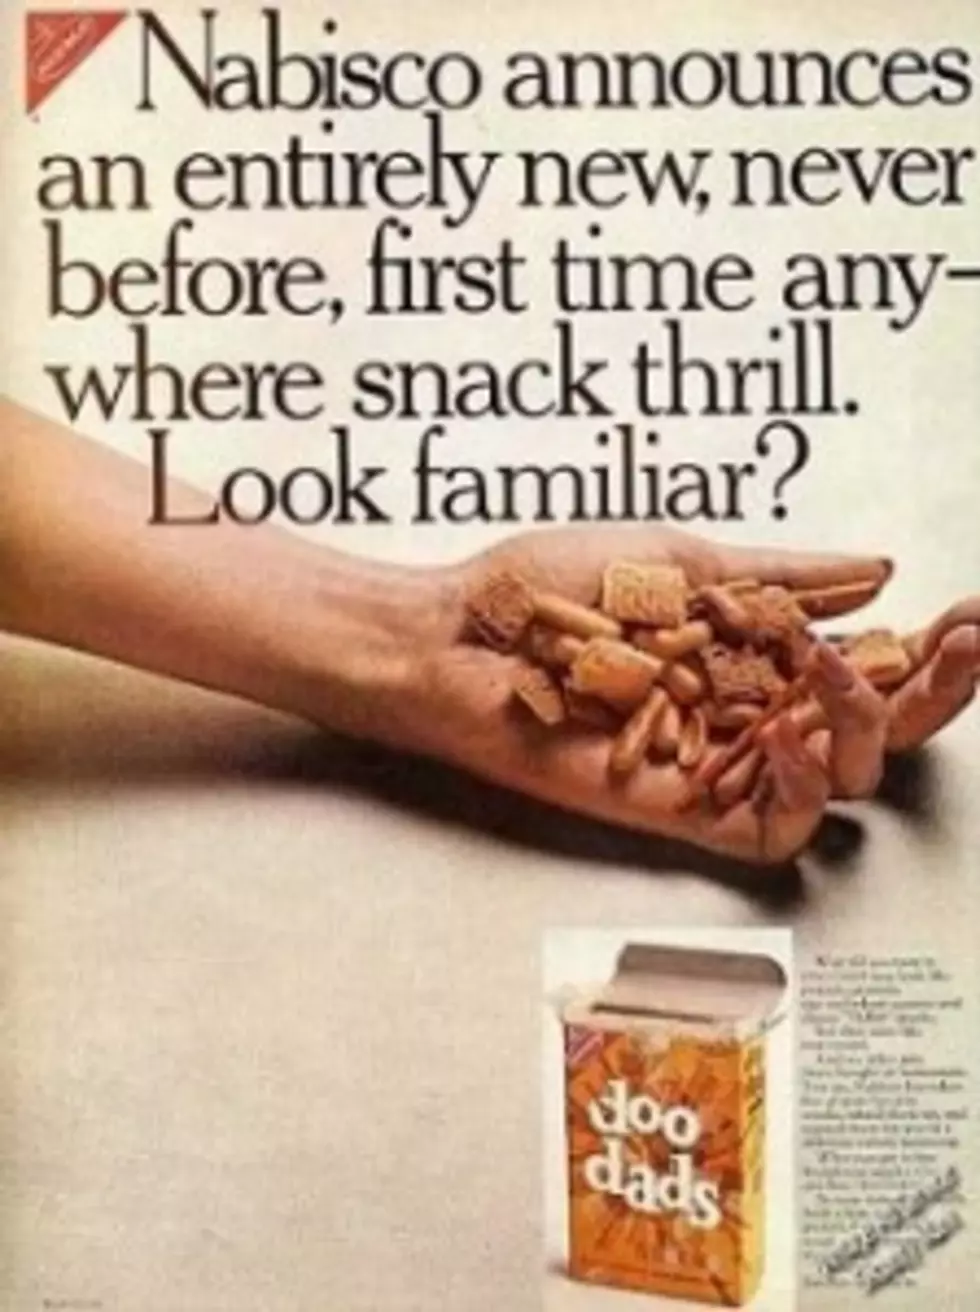 Whatever Happened to Doodads?